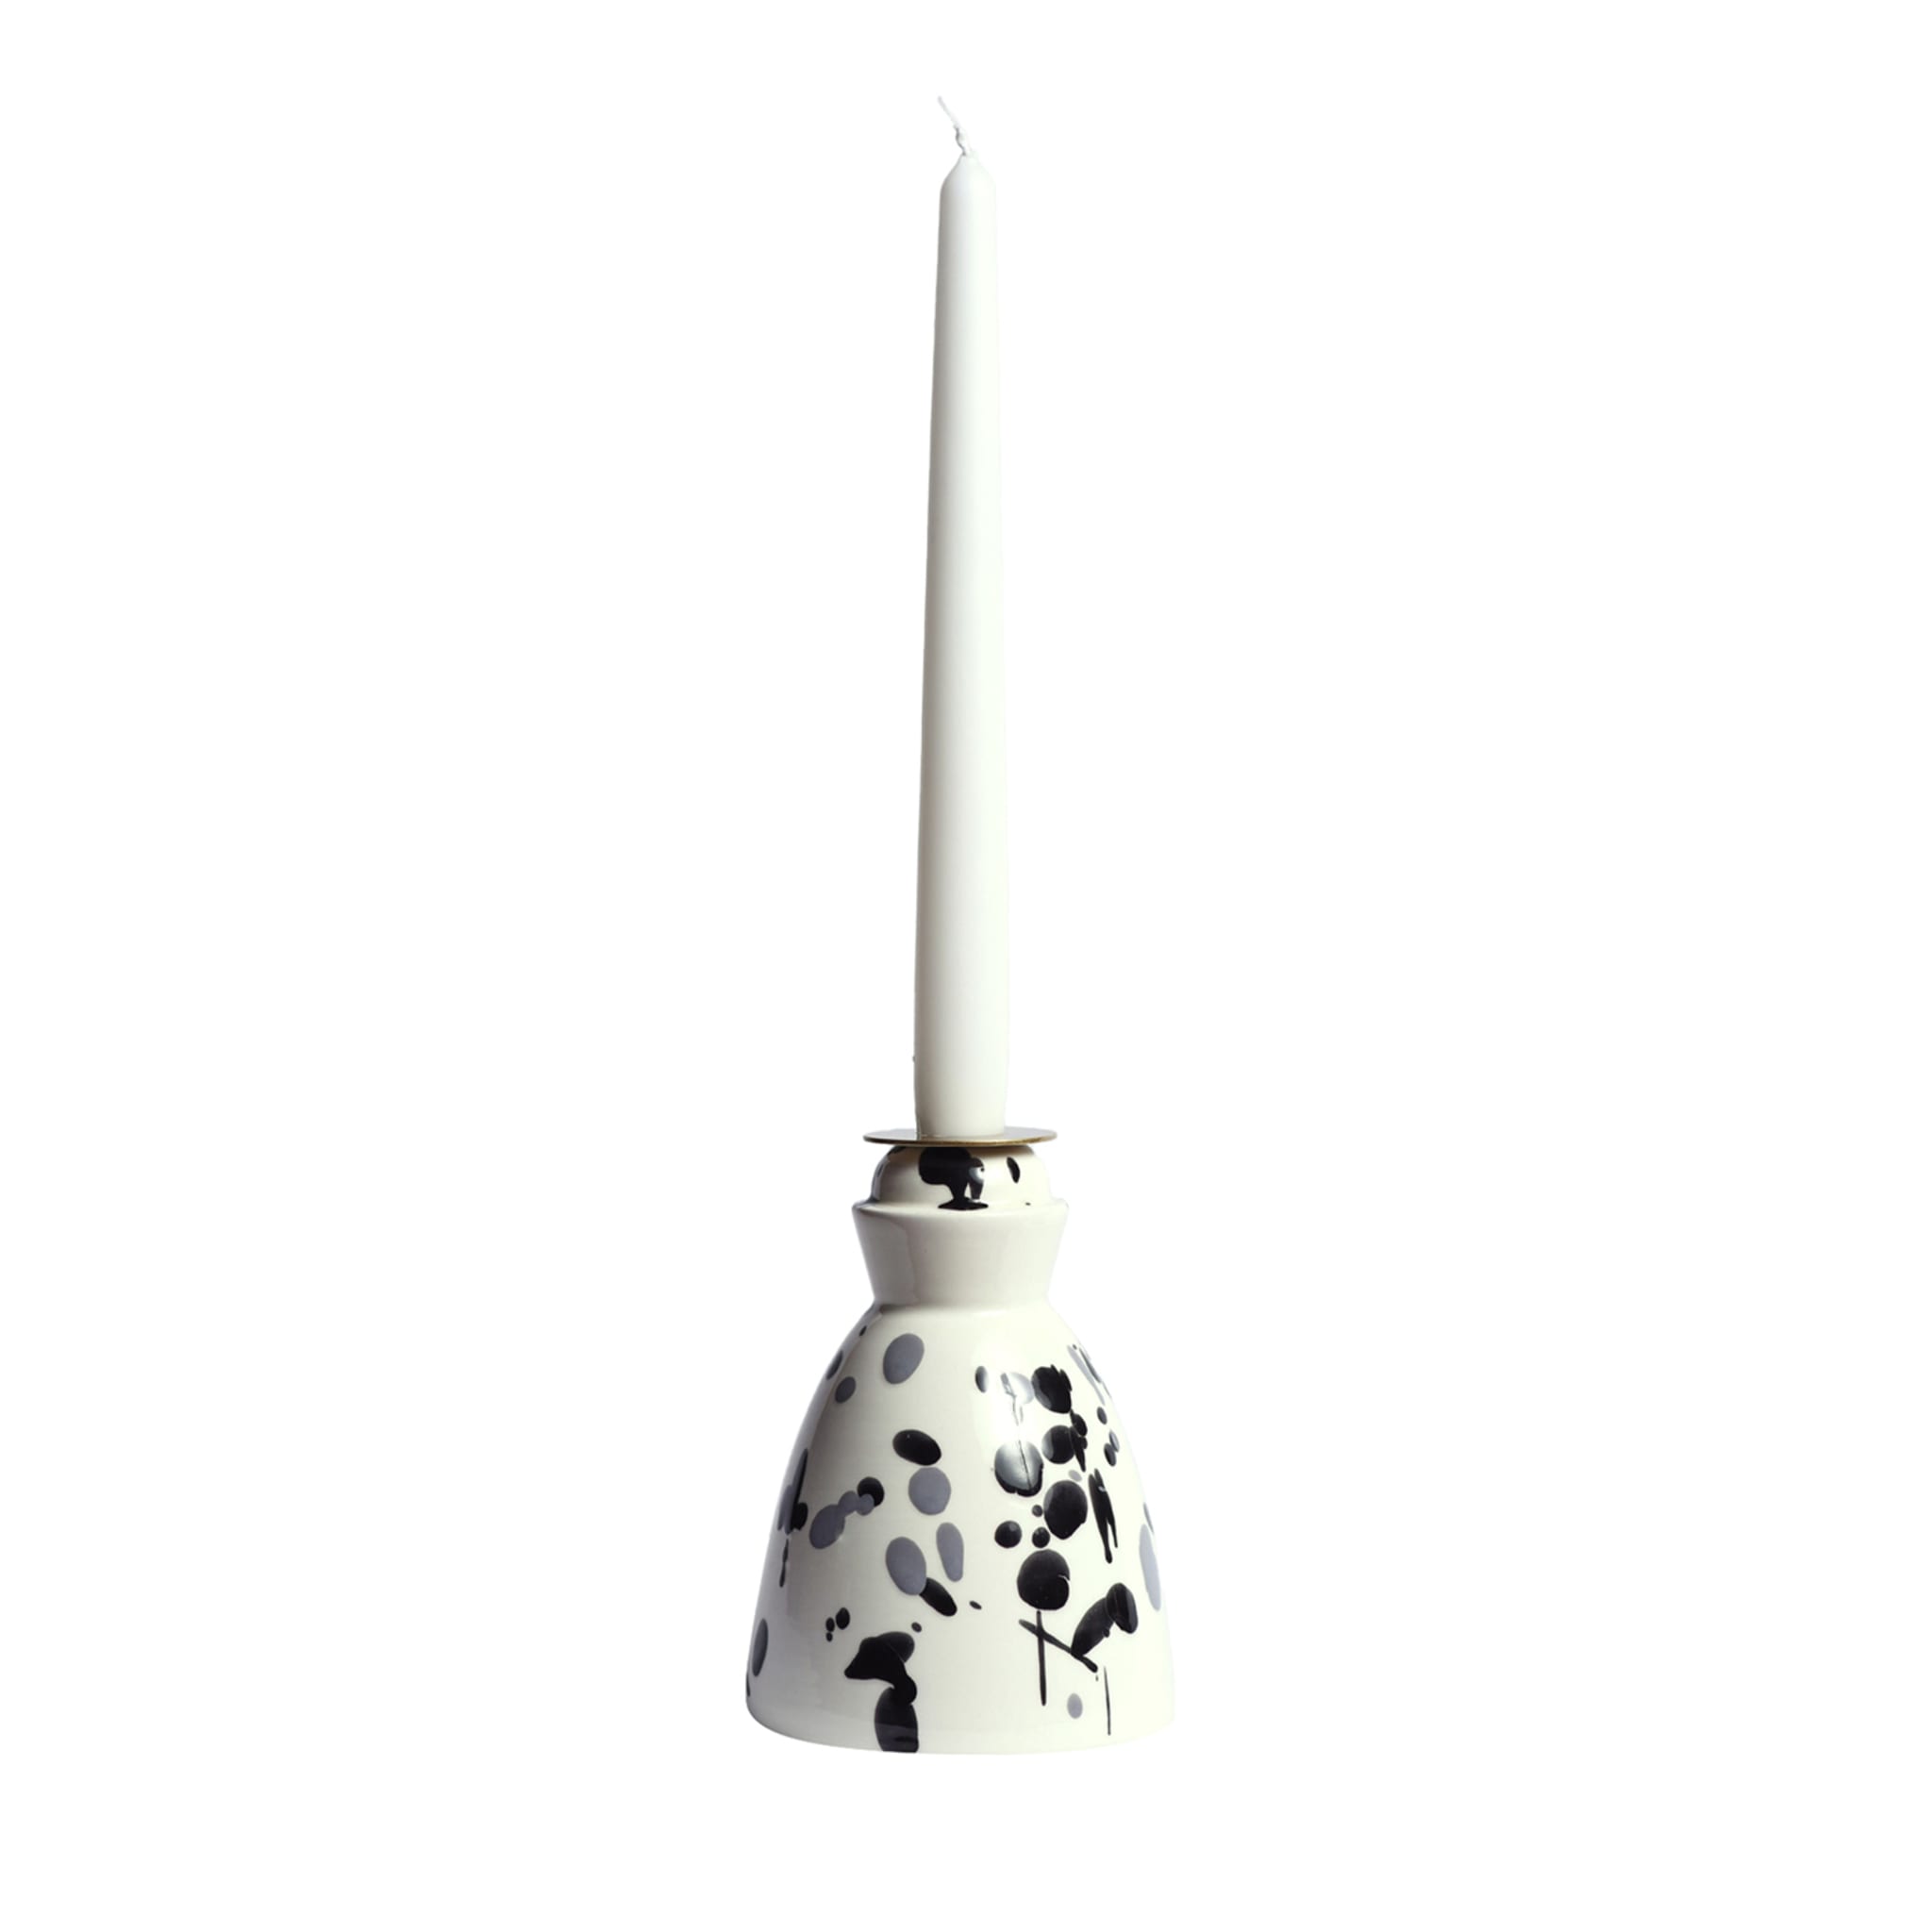 Black & White Ceramic Candlestick with 4 Beeswax Candles - Main view